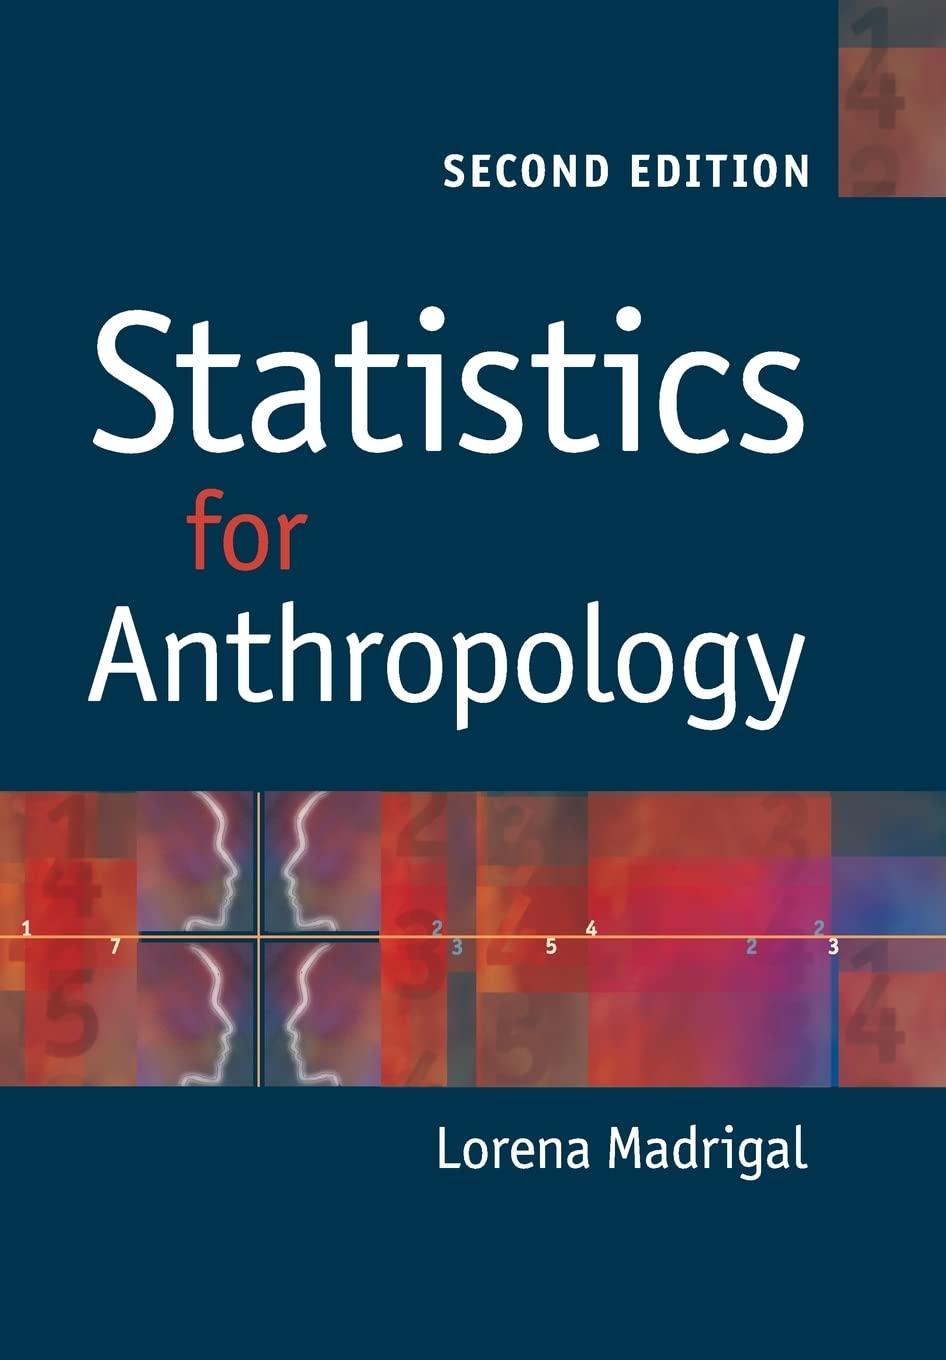 statistics for anthropology 2nd edition lorena madrigal 0521147085, 978-0521147088